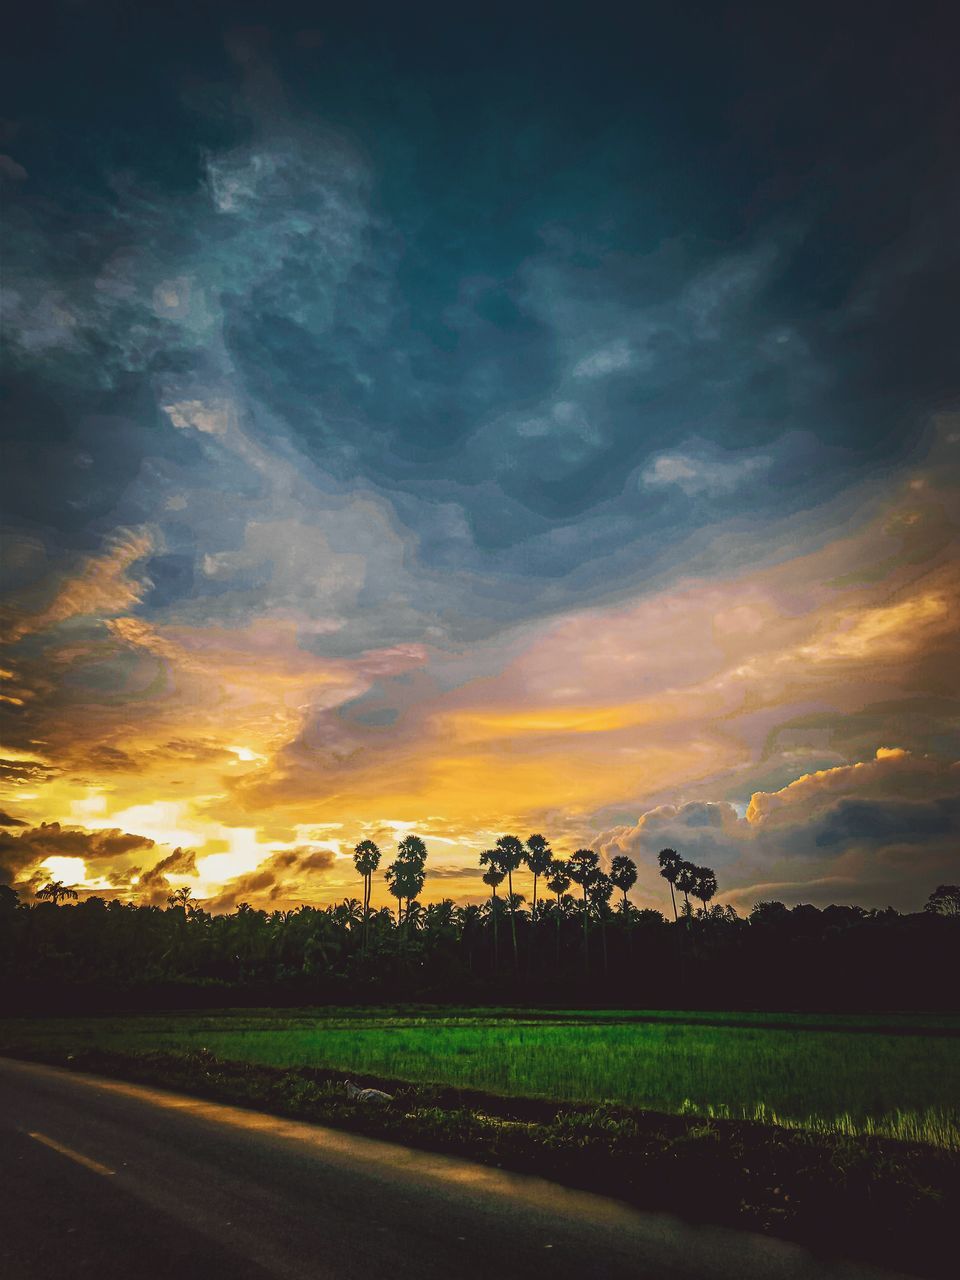 sky, cloud, landscape, environment, horizon, sunset, beauty in nature, nature, plant, scenics - nature, field, land, rural scene, no people, tranquility, dawn, tranquil scene, tree, road, evening, agriculture, sunlight, dramatic sky, outdoors, afterglow, grass, idyllic, transportation, non-urban scene, crop